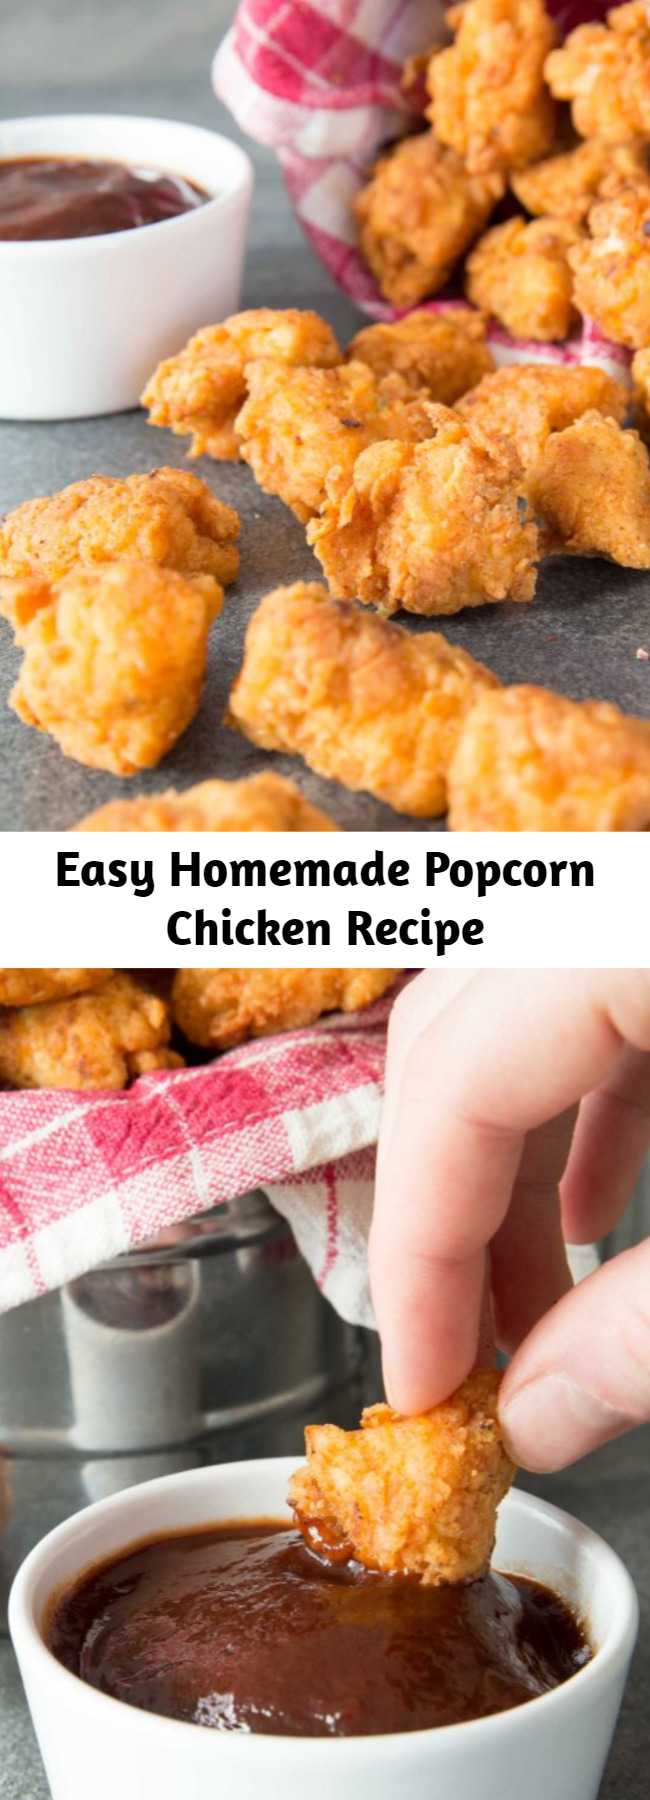 Easy Homemade Popcorn Chicken Recipe - Homemade Popcorn Chicken couldn't be easier to make! The key is marinating in buttermilk for that crispy, flaky finish. But warning, these are incredibly moreish!! #popcornchicken #chicken #kfc #gameday #snack #appetizers